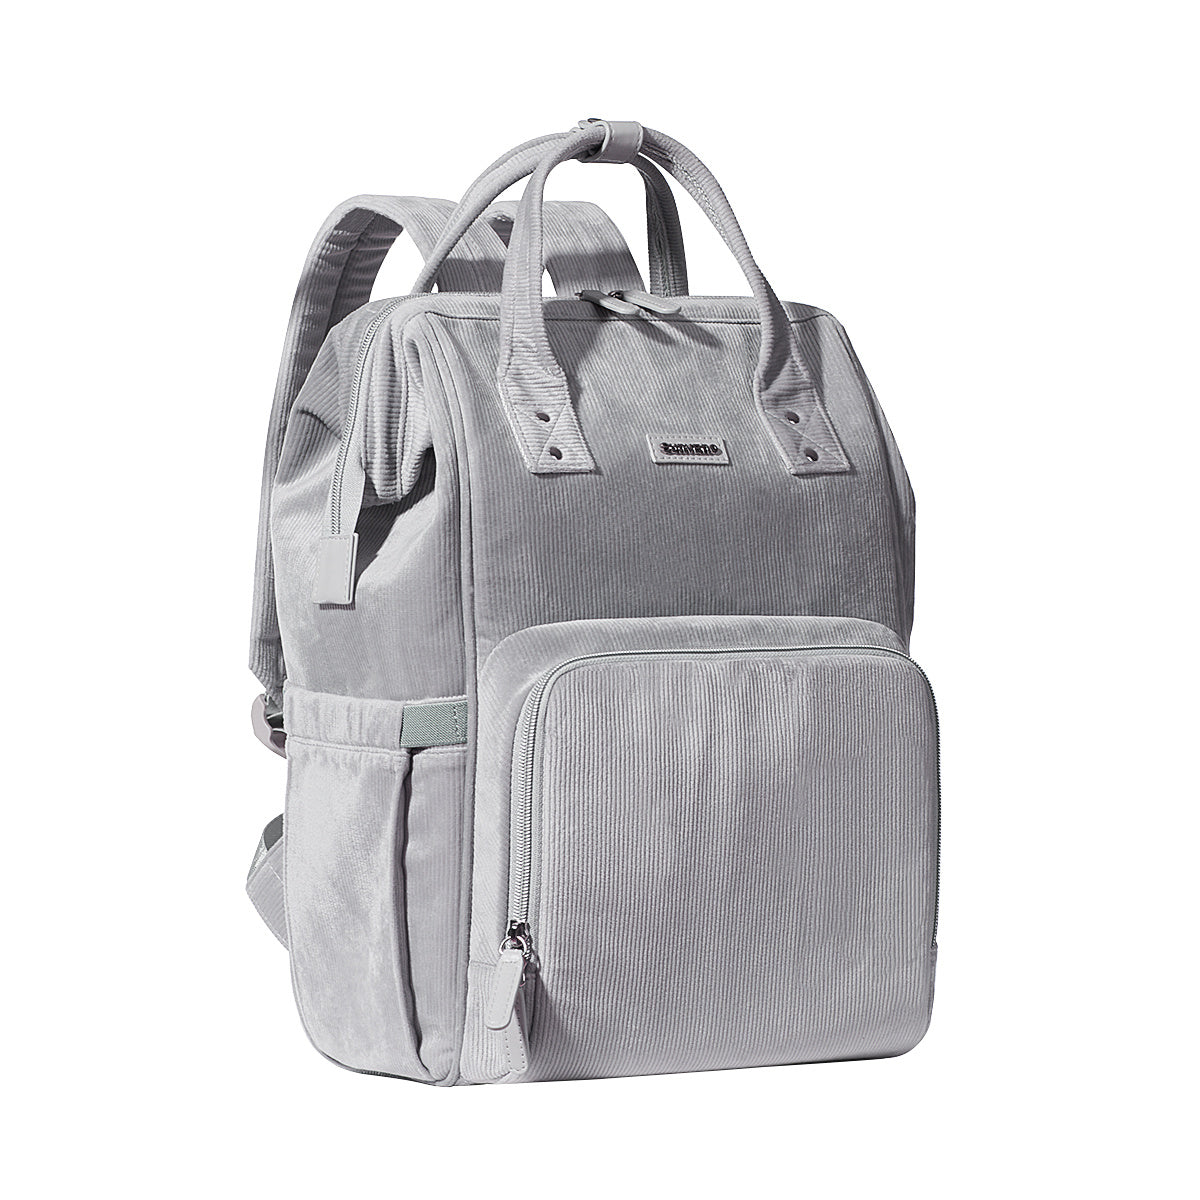 A gray SUNVENO Velvet Stitching Diaper Bag Backpack Large Capacity Tote Shoulder Nappy Bag Organizer for Baby Care with Insulated Pockets, Waterproof Fabric with dual top handles, padded shoulder straps, a front zippered pocket, and side pockets. The bag has a rectangular shape with a textured fabric finish and multi-pockets large capacity, making it perfect as a travel mom bag or diaper backpack.